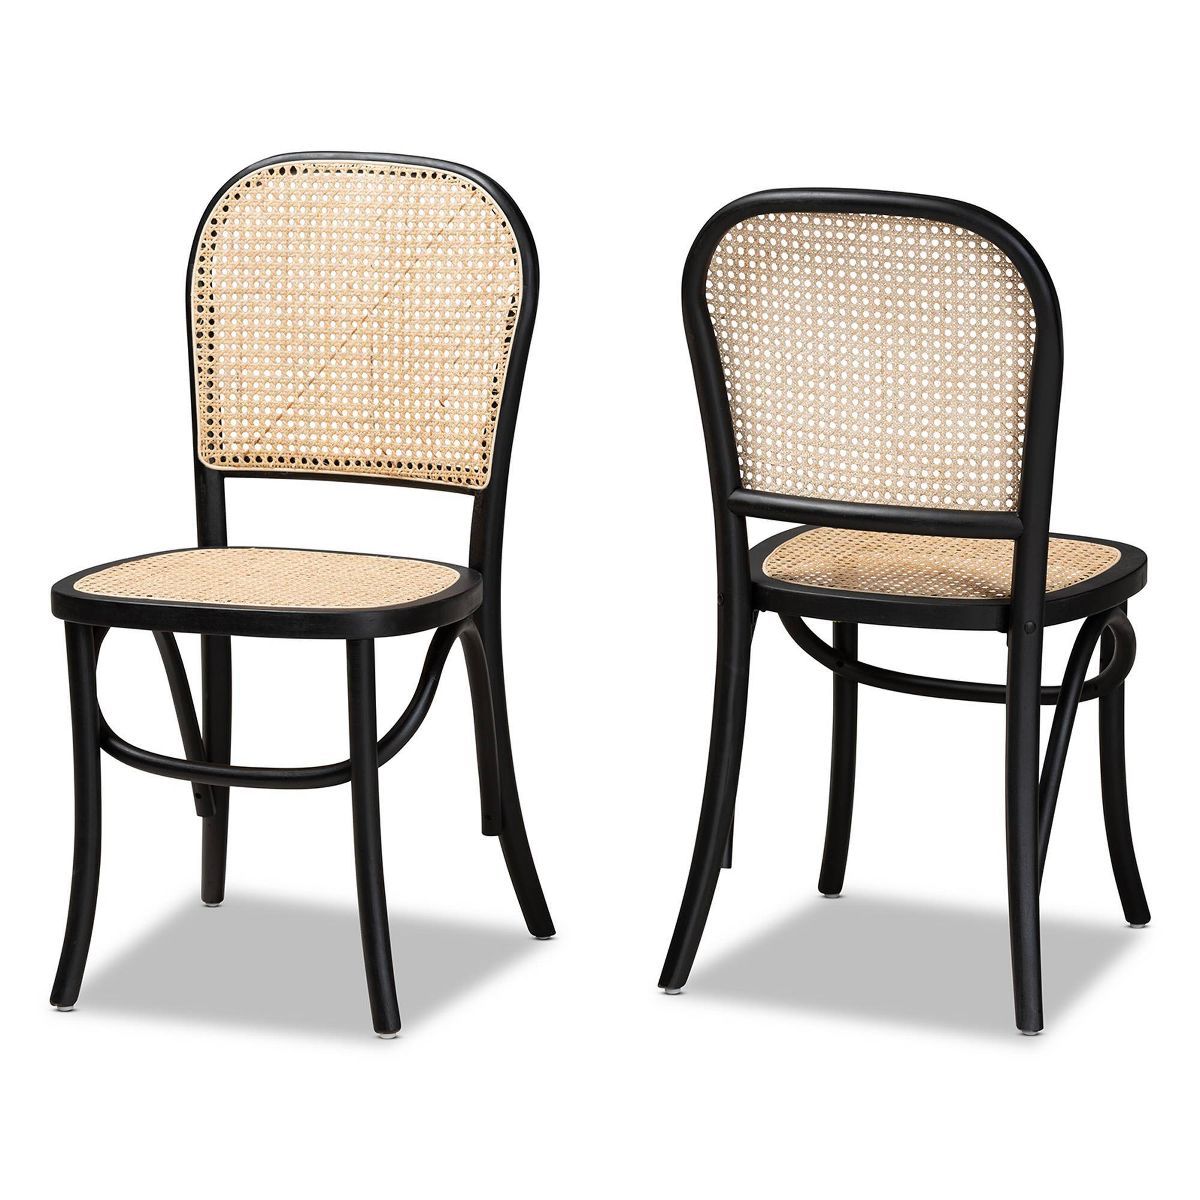 2pc Cambree Woven Rattan and Wood Cane Dining Chair Set Brown/Black - Baxton Studio | Target